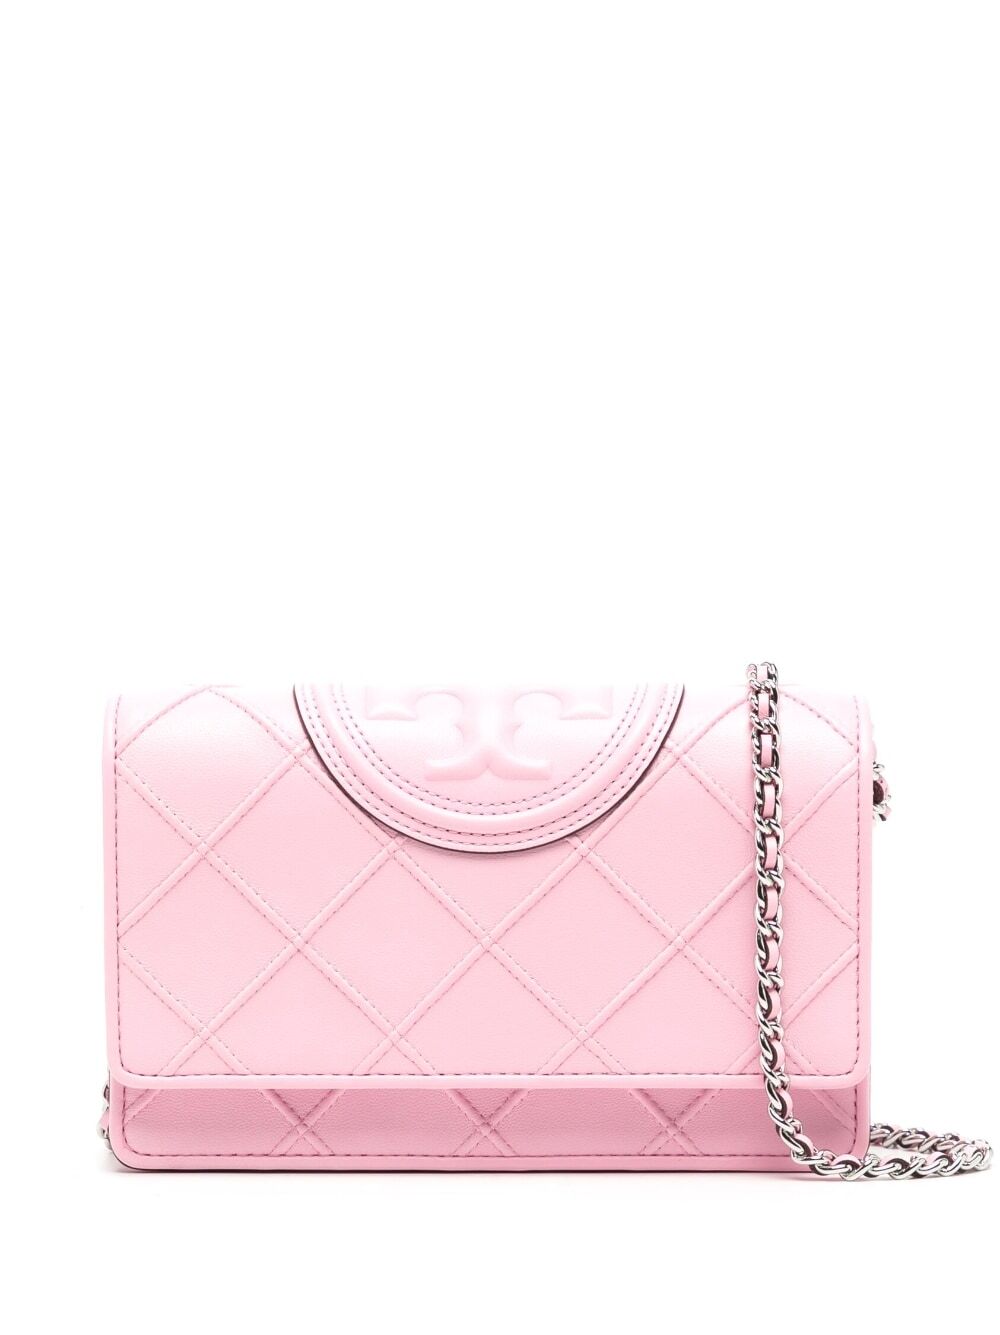 Tory Burch Fleming leather clutch bag - Pink